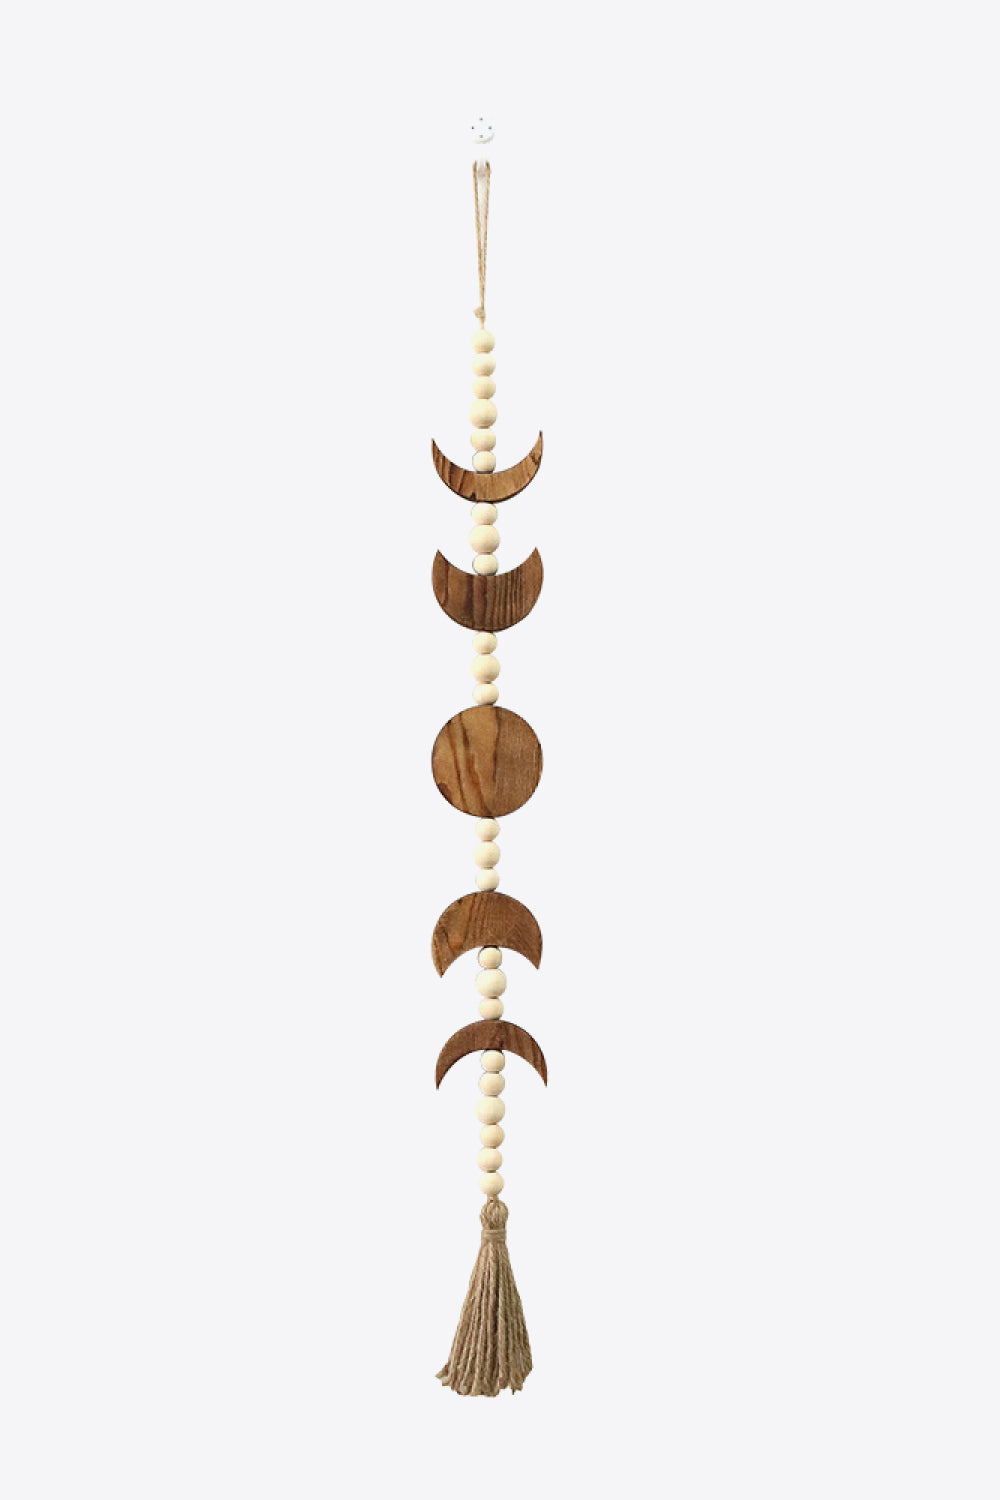 White Smoke Wooden Tassel Wall Hanging Sentient Beauty Fashions Home Decor